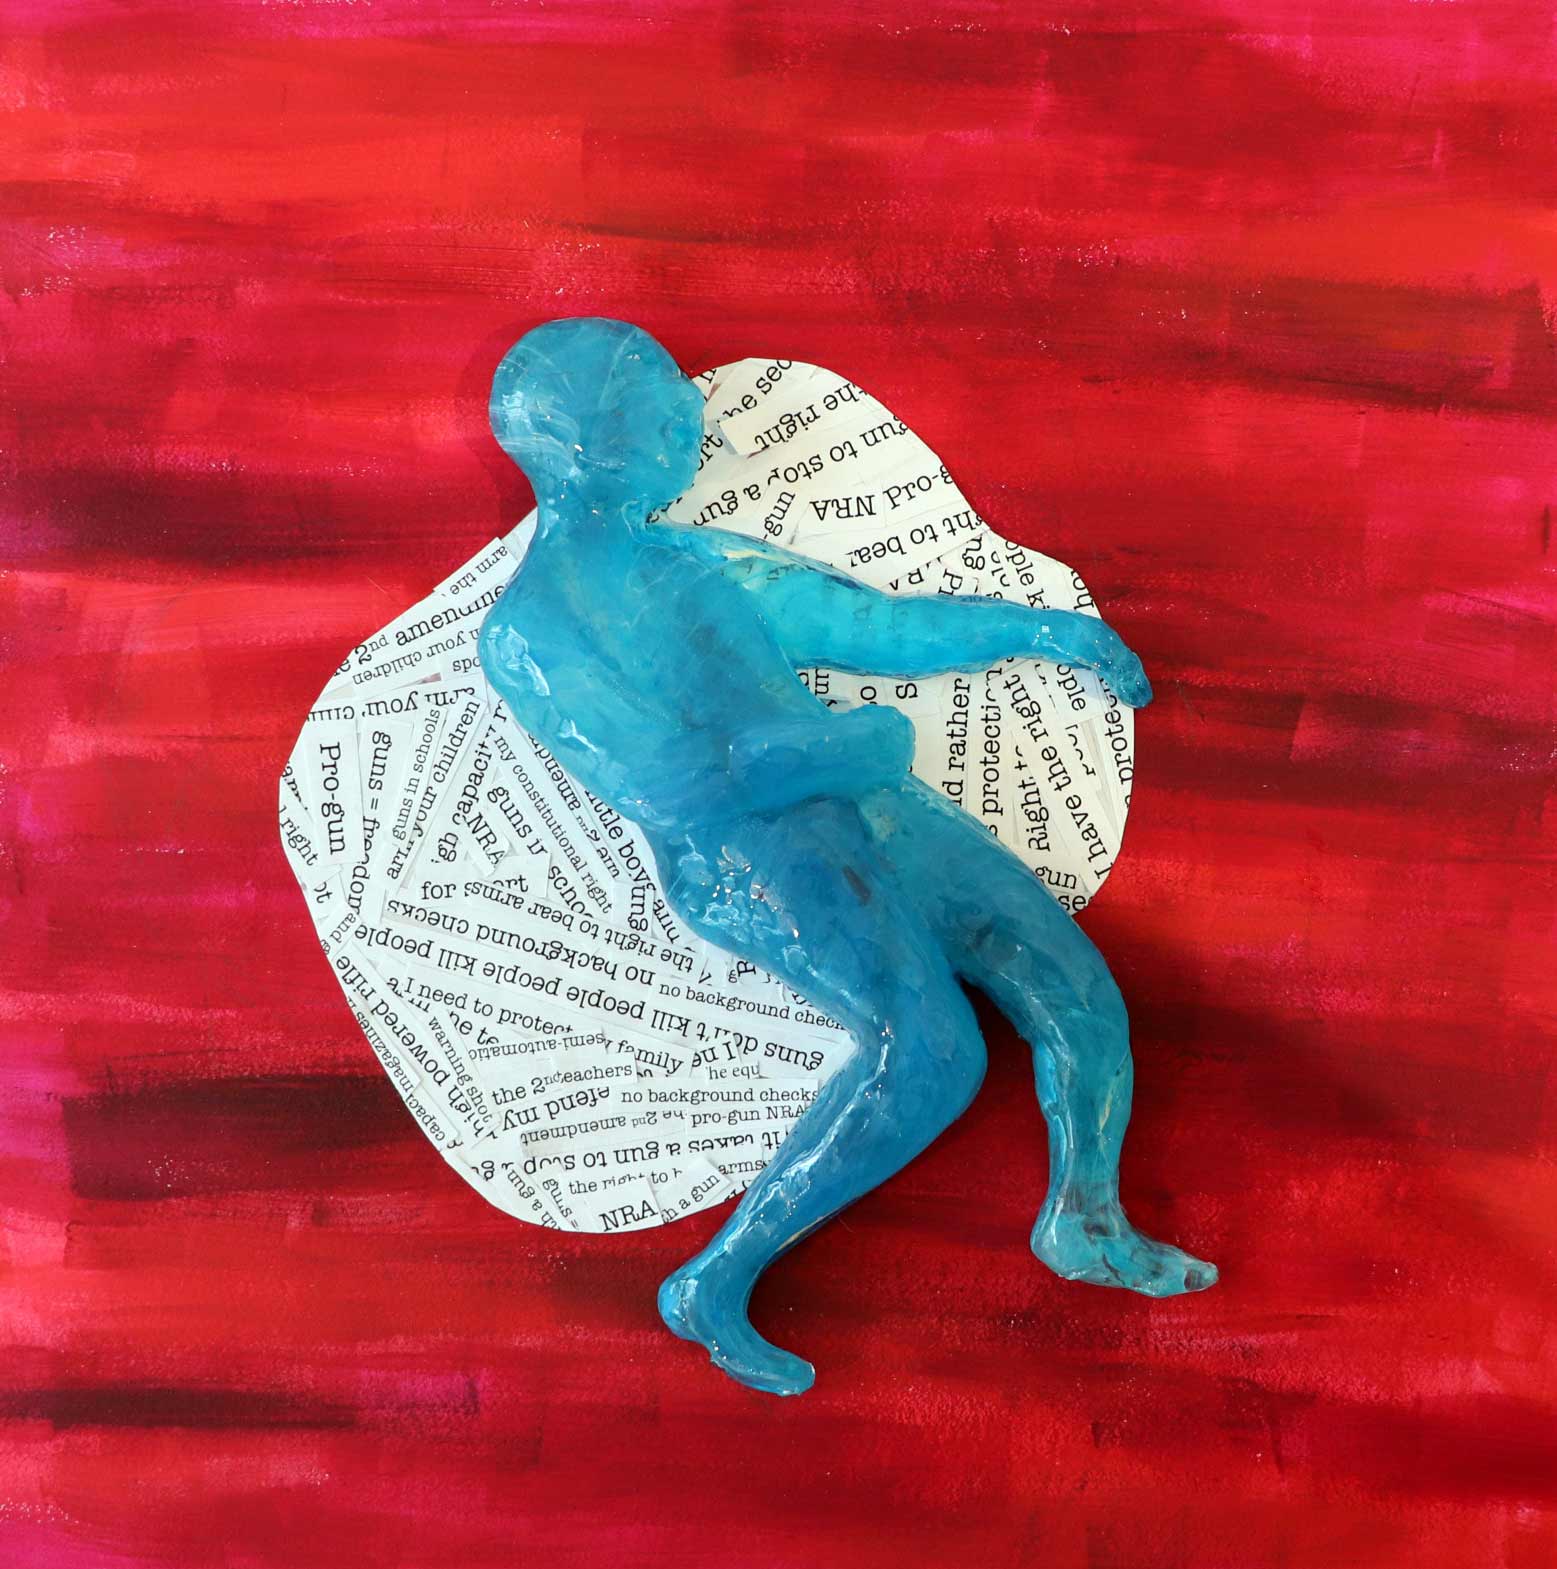 A small sculpture of a person laying down on a red sheet, with text fragments formed in the shape of a pool of blood with text relating to gun violence